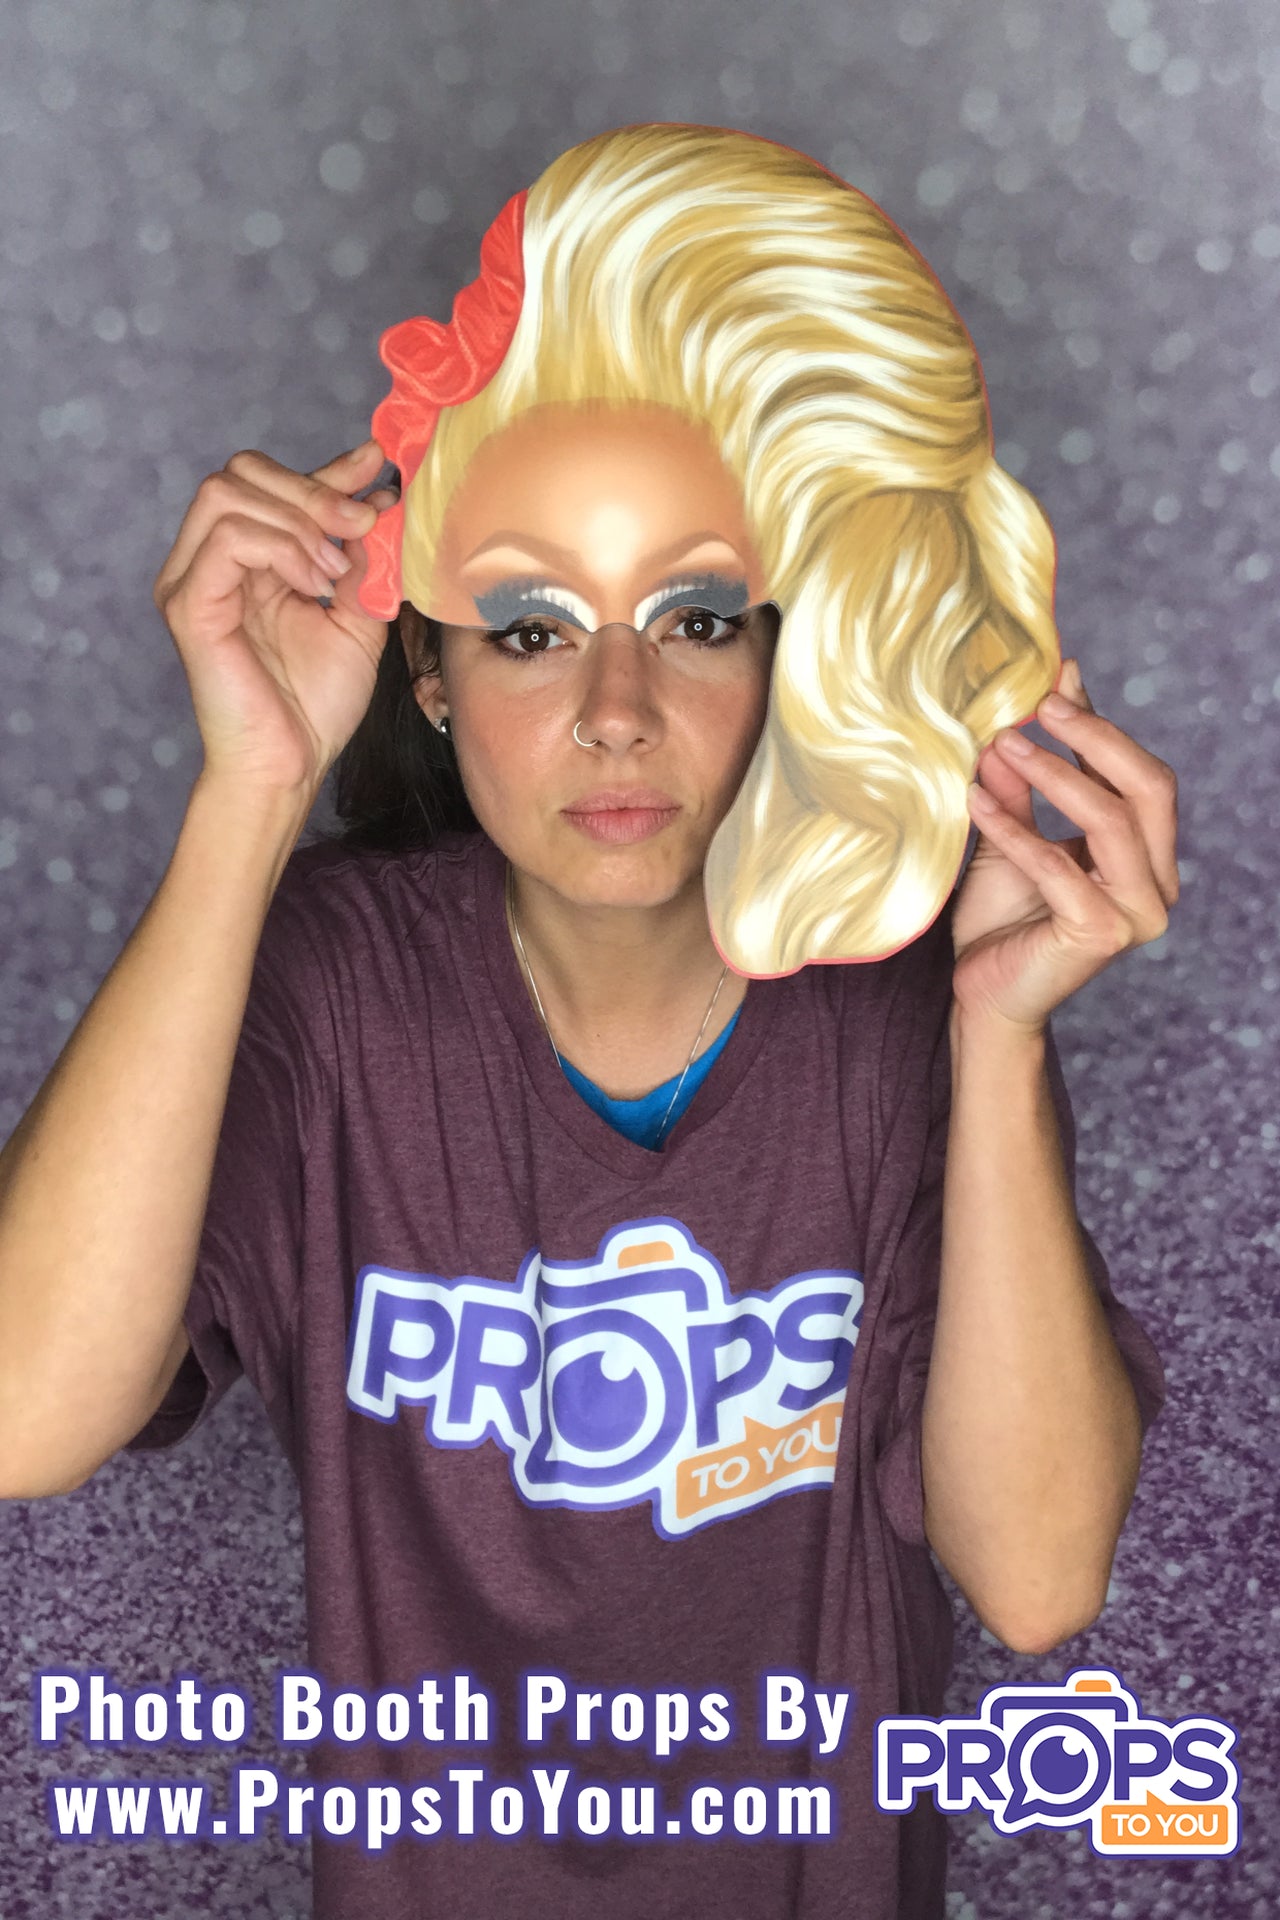 BUNDLE! Drag - 5 Double-Sided Photo Booth Props